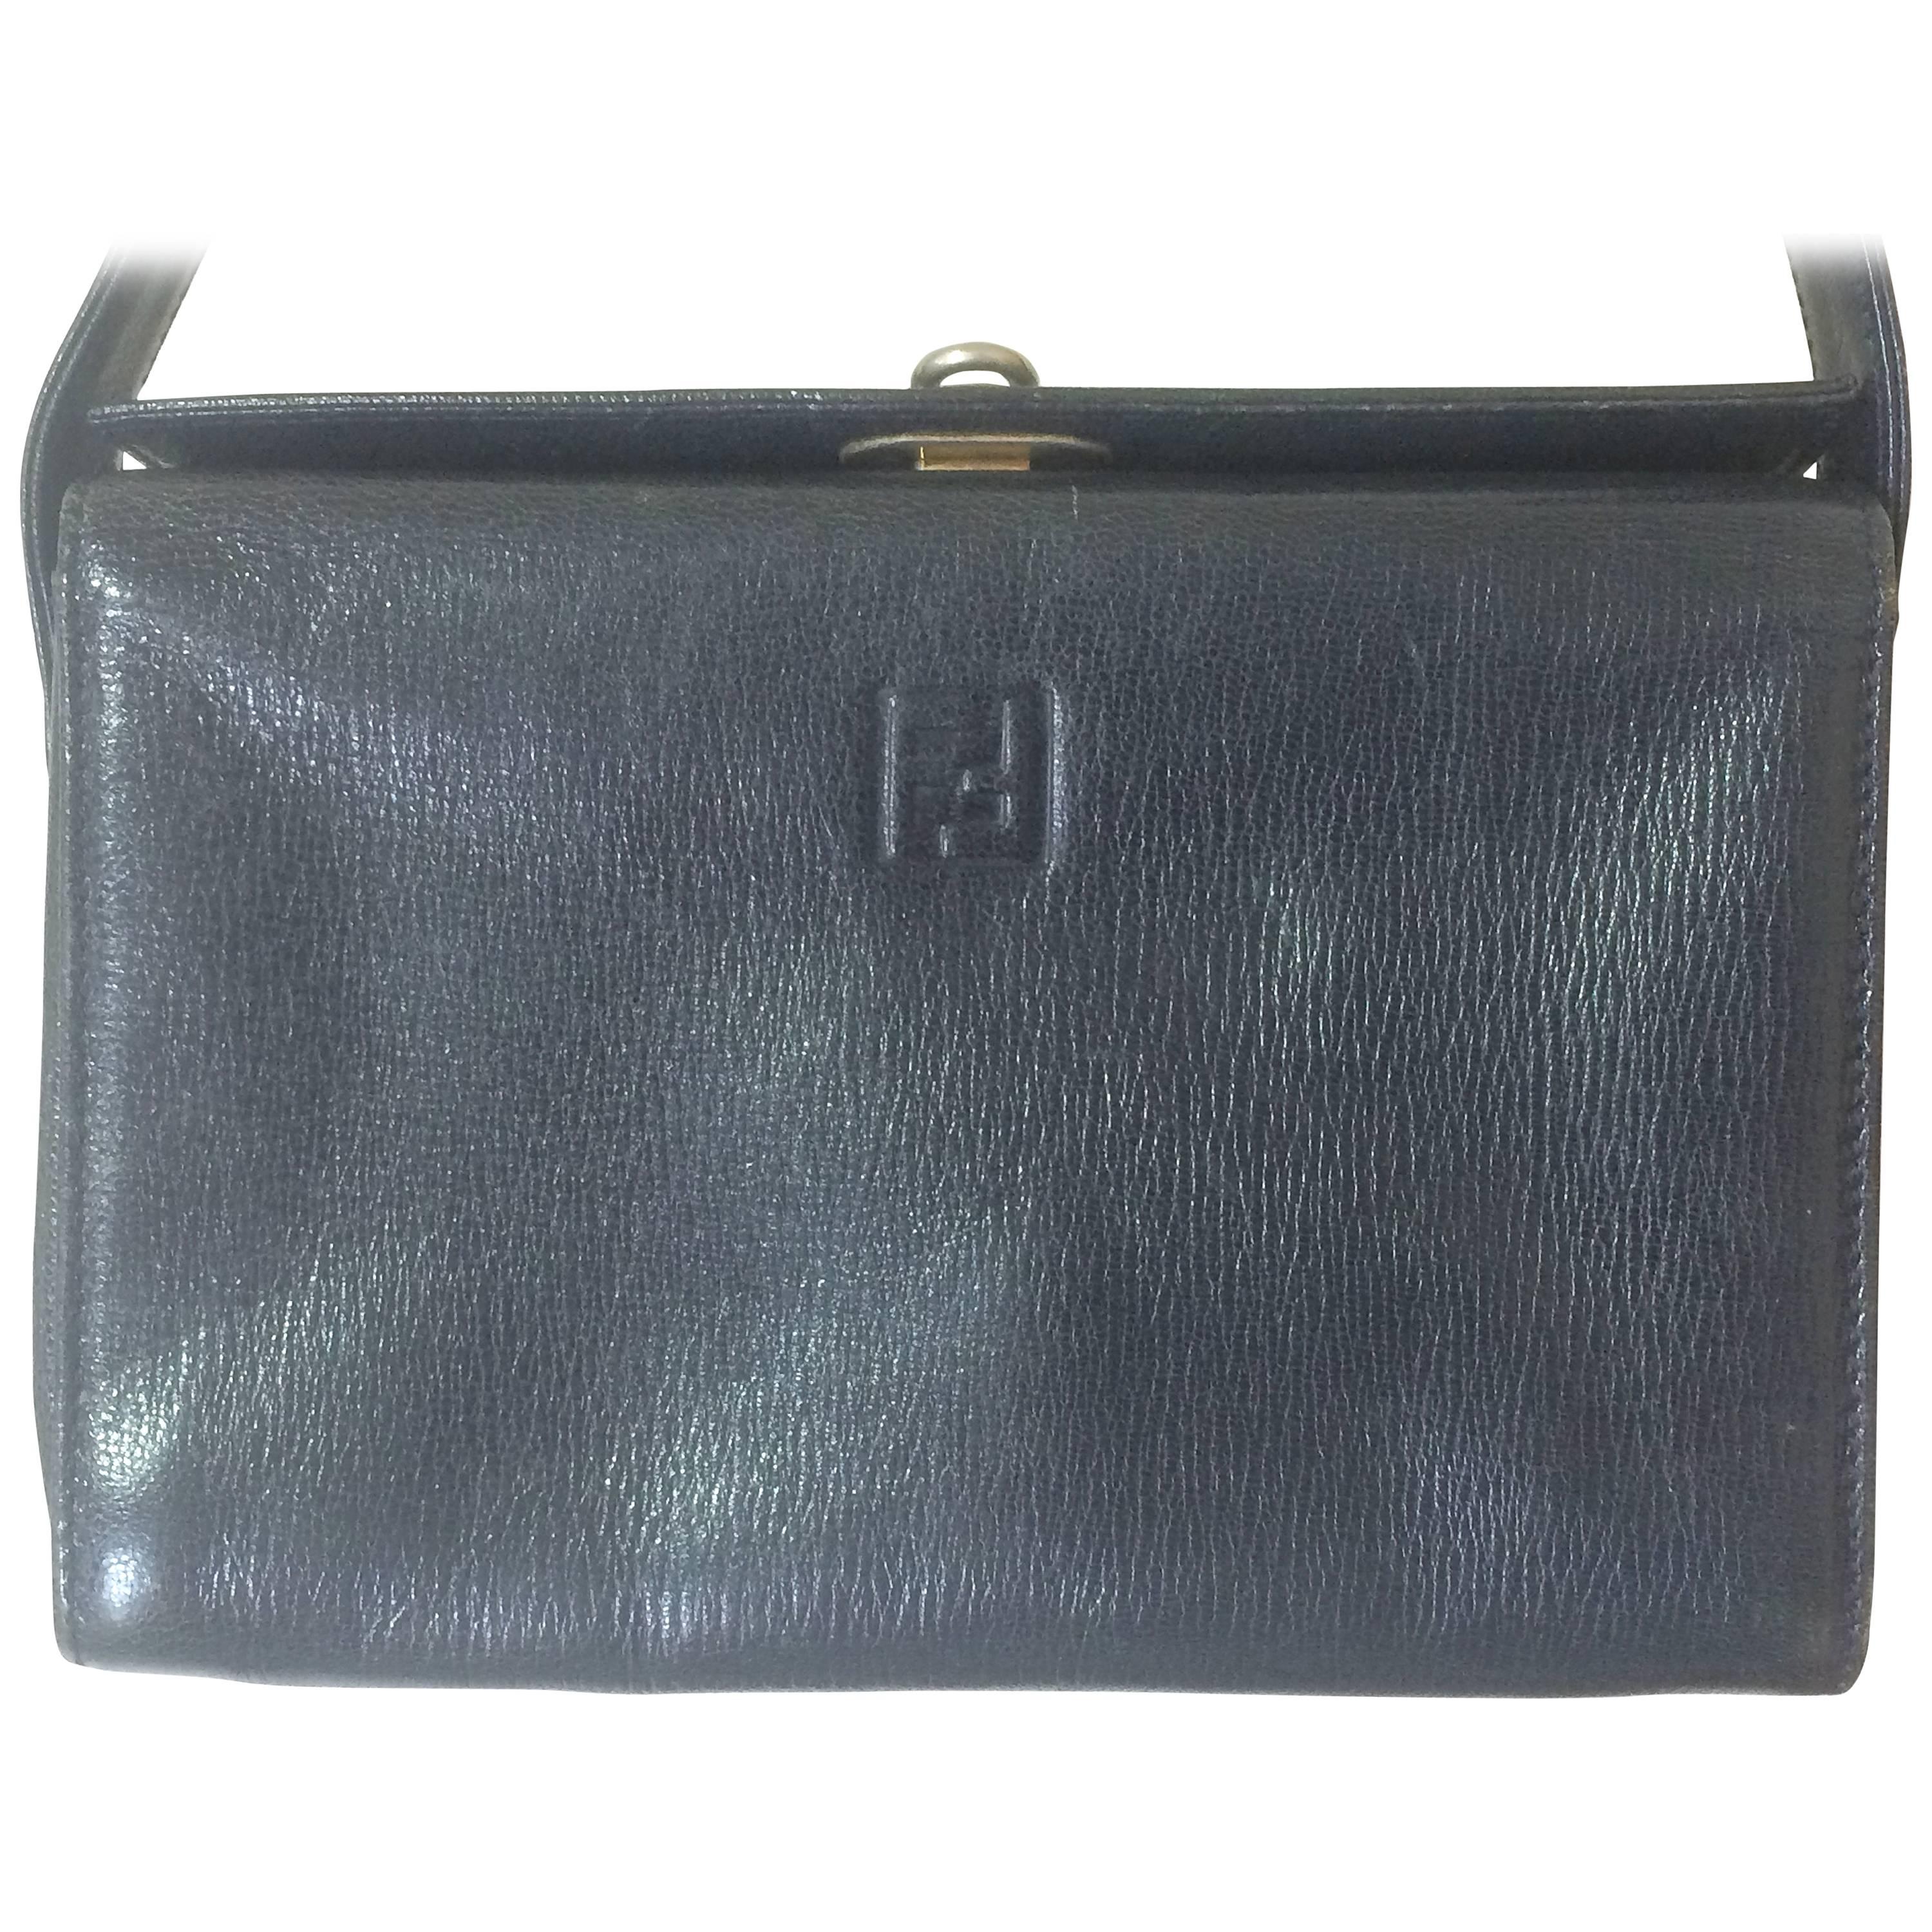 Vintage FENDI genuine navy leather square and triangle shape handbag with logo For Sale